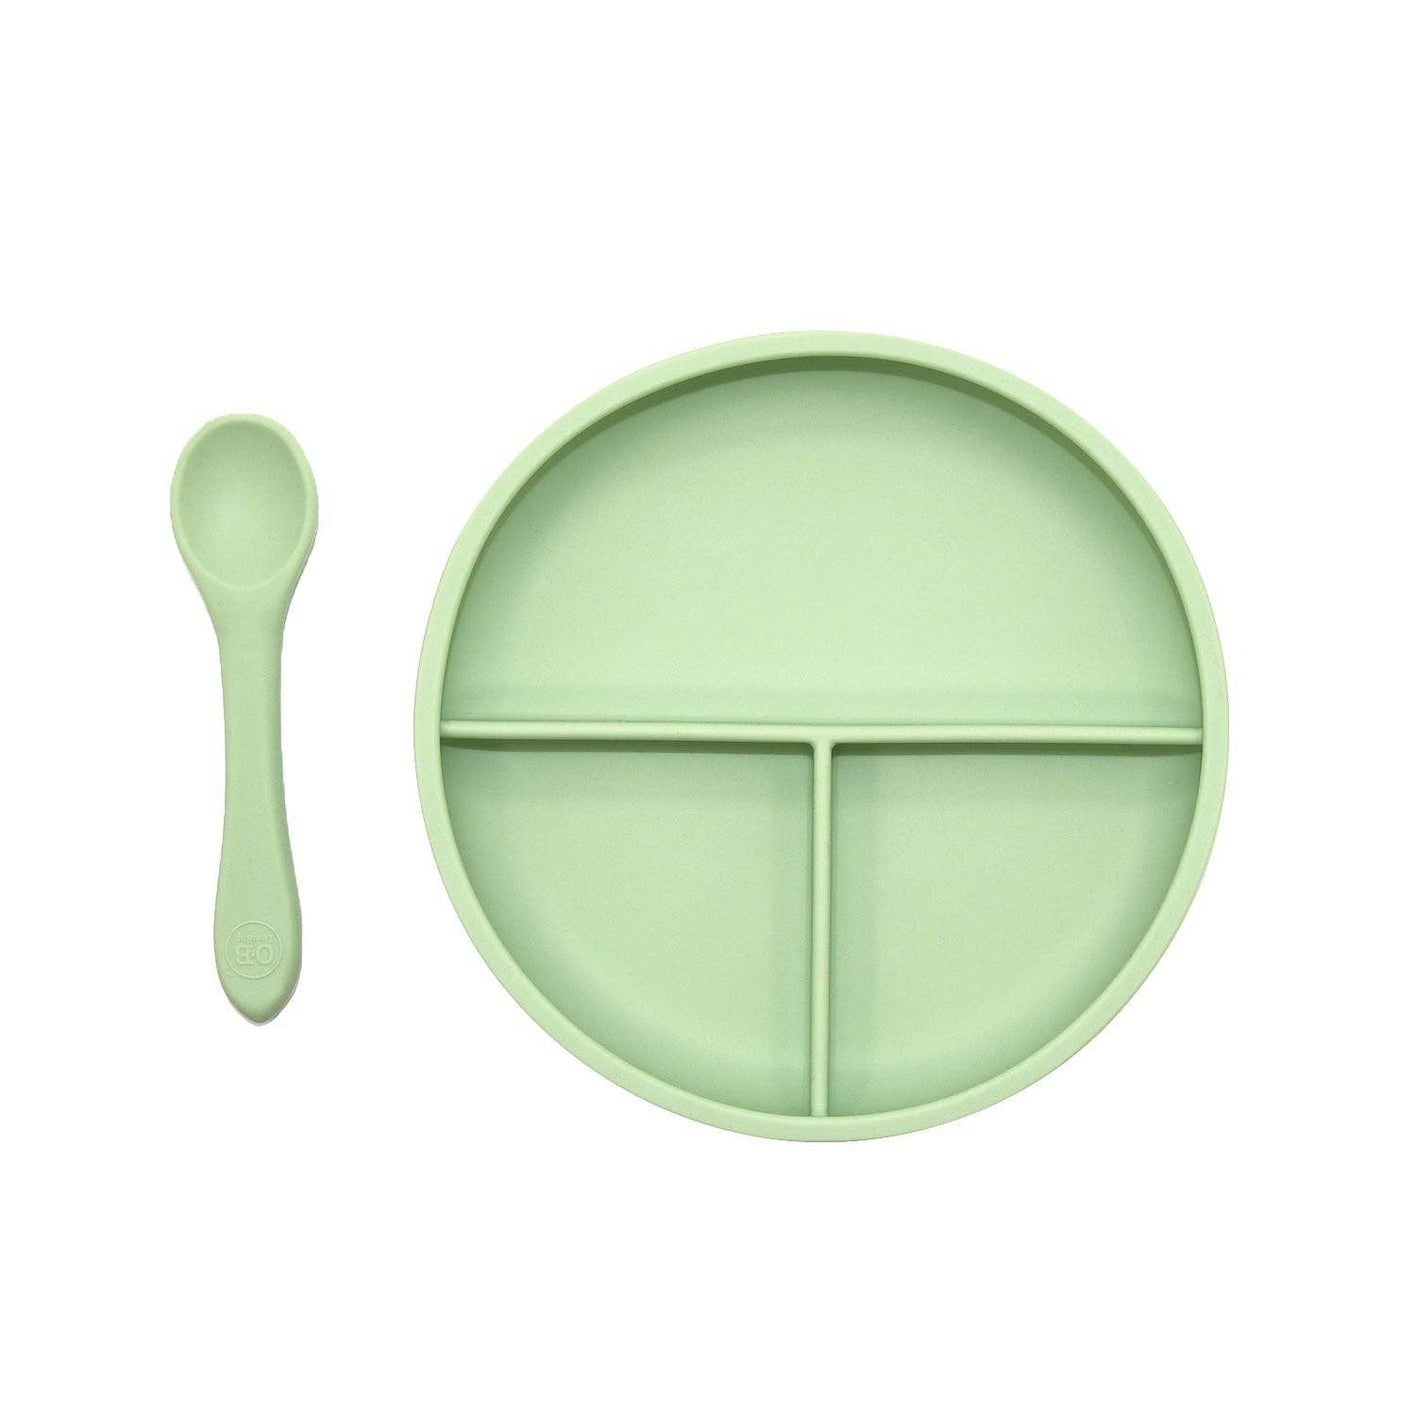 Suction Divider Plate & Spoon Set | Mint - OB